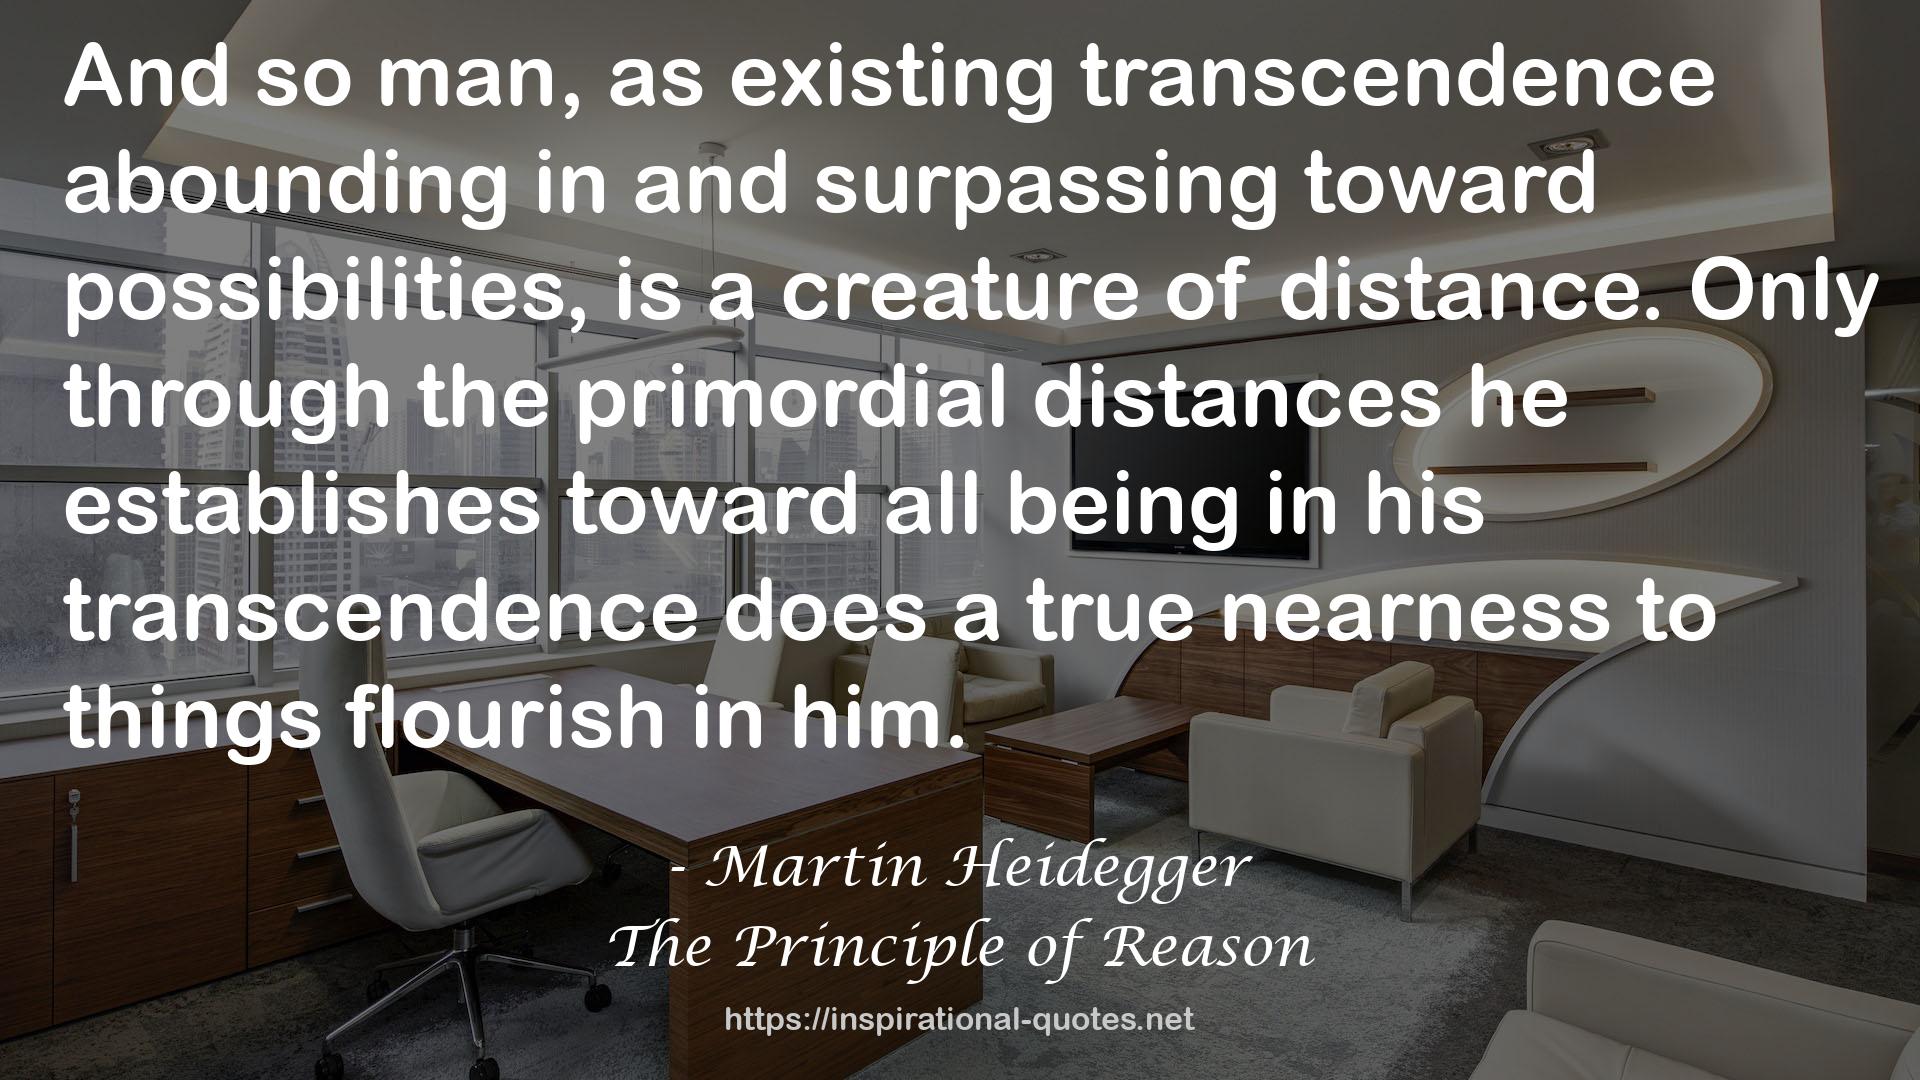 The Principle of Reason QUOTES